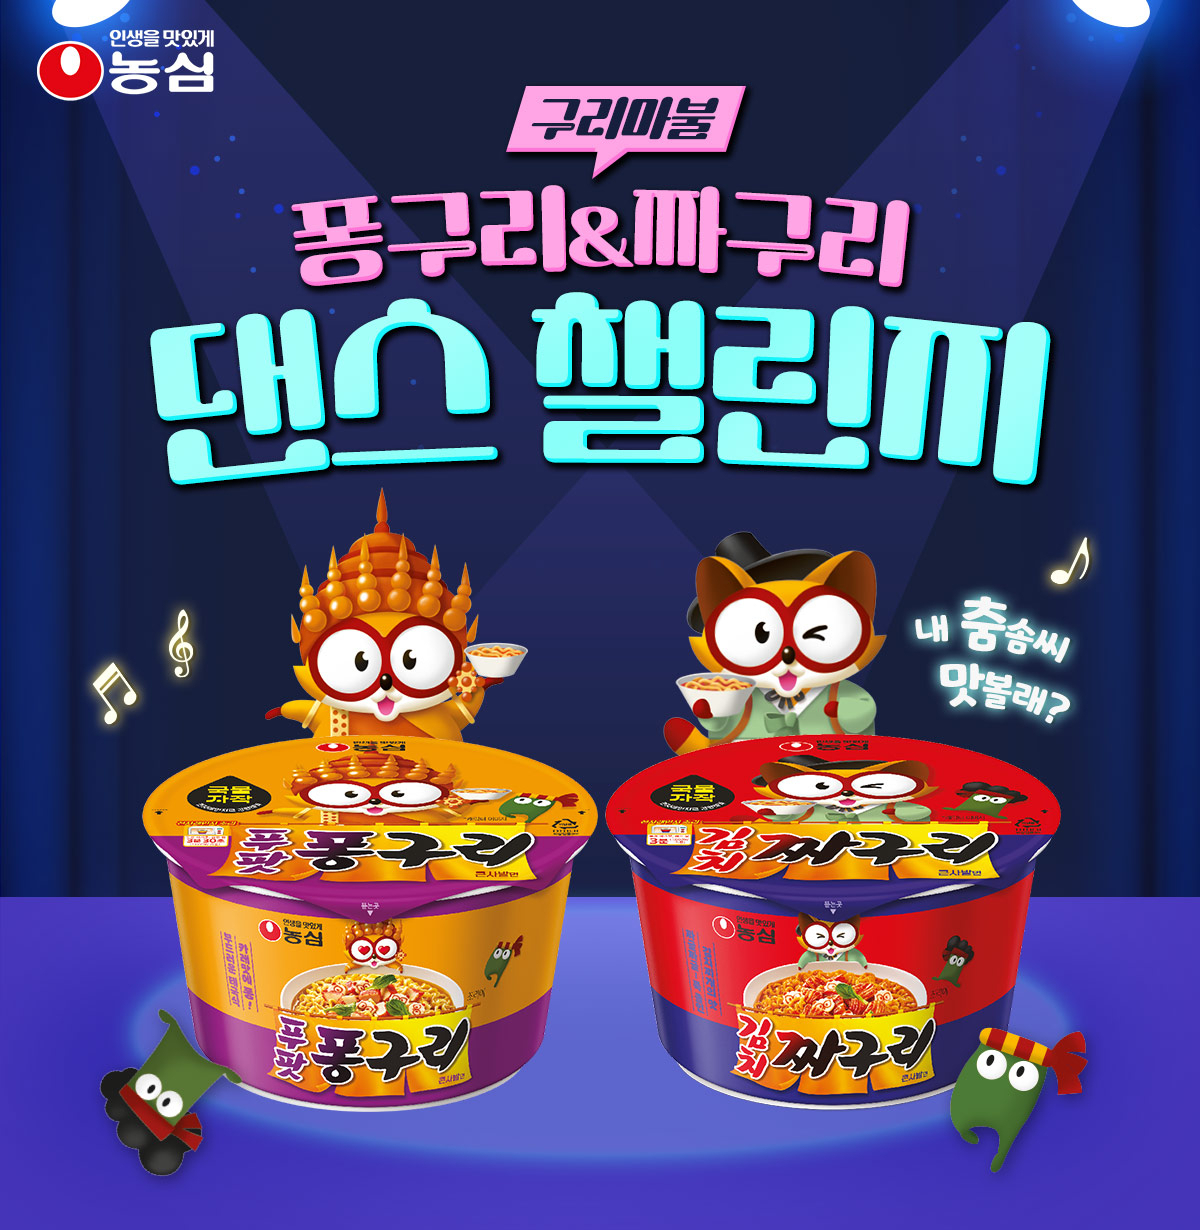 The dance challenge poster for Nongshim's new ramyeon products (Nongshim)